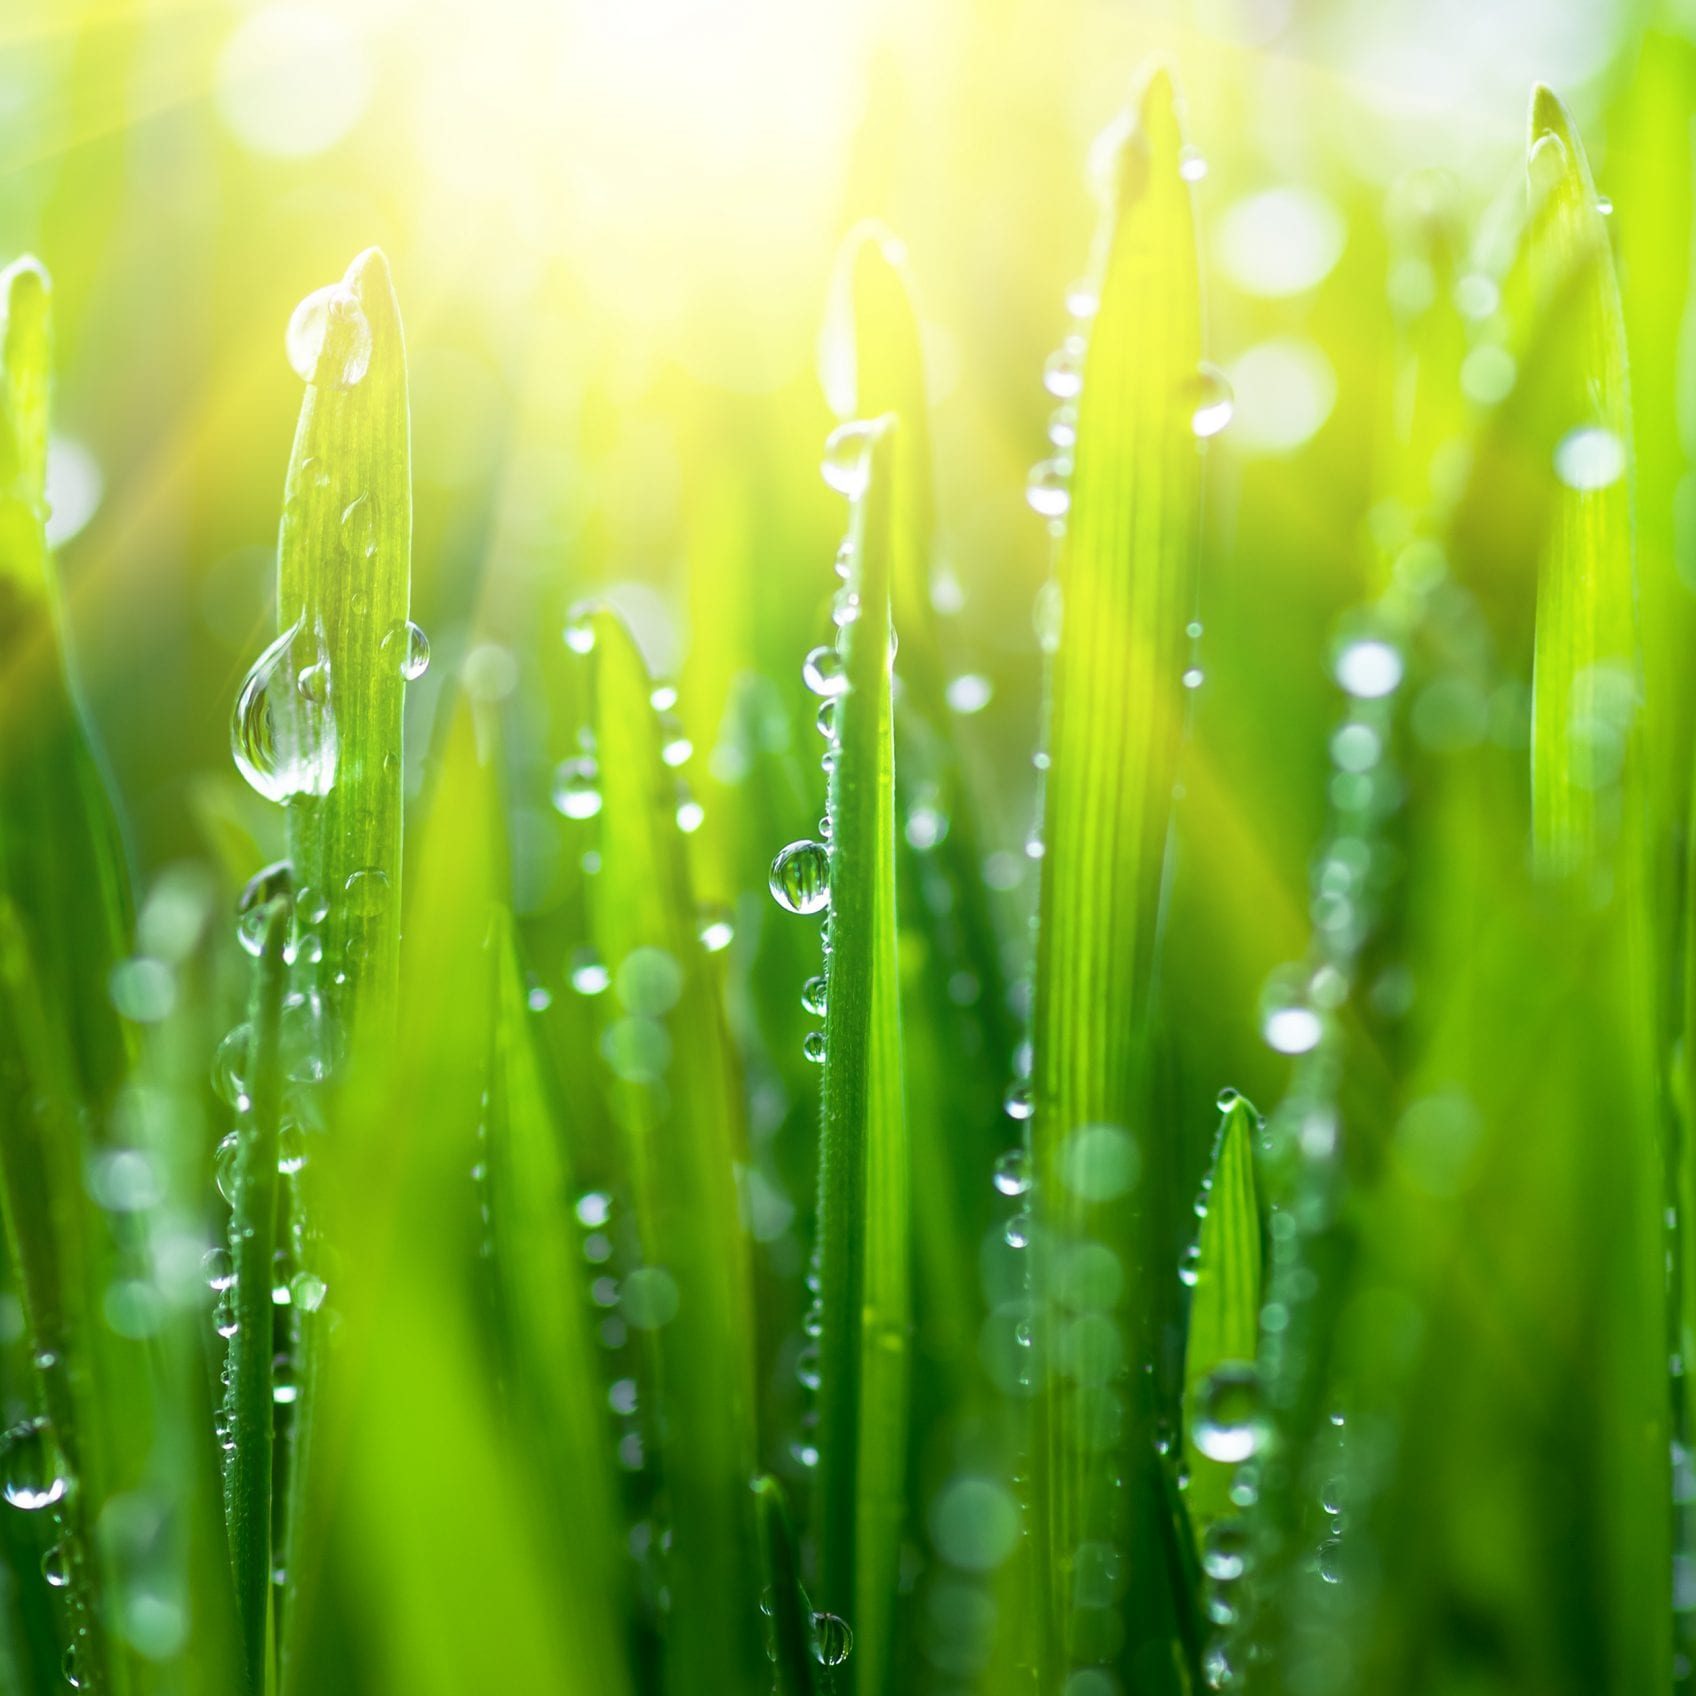 Drops,Of,Dew,On,The,Beautiful,Green,Grass,Background